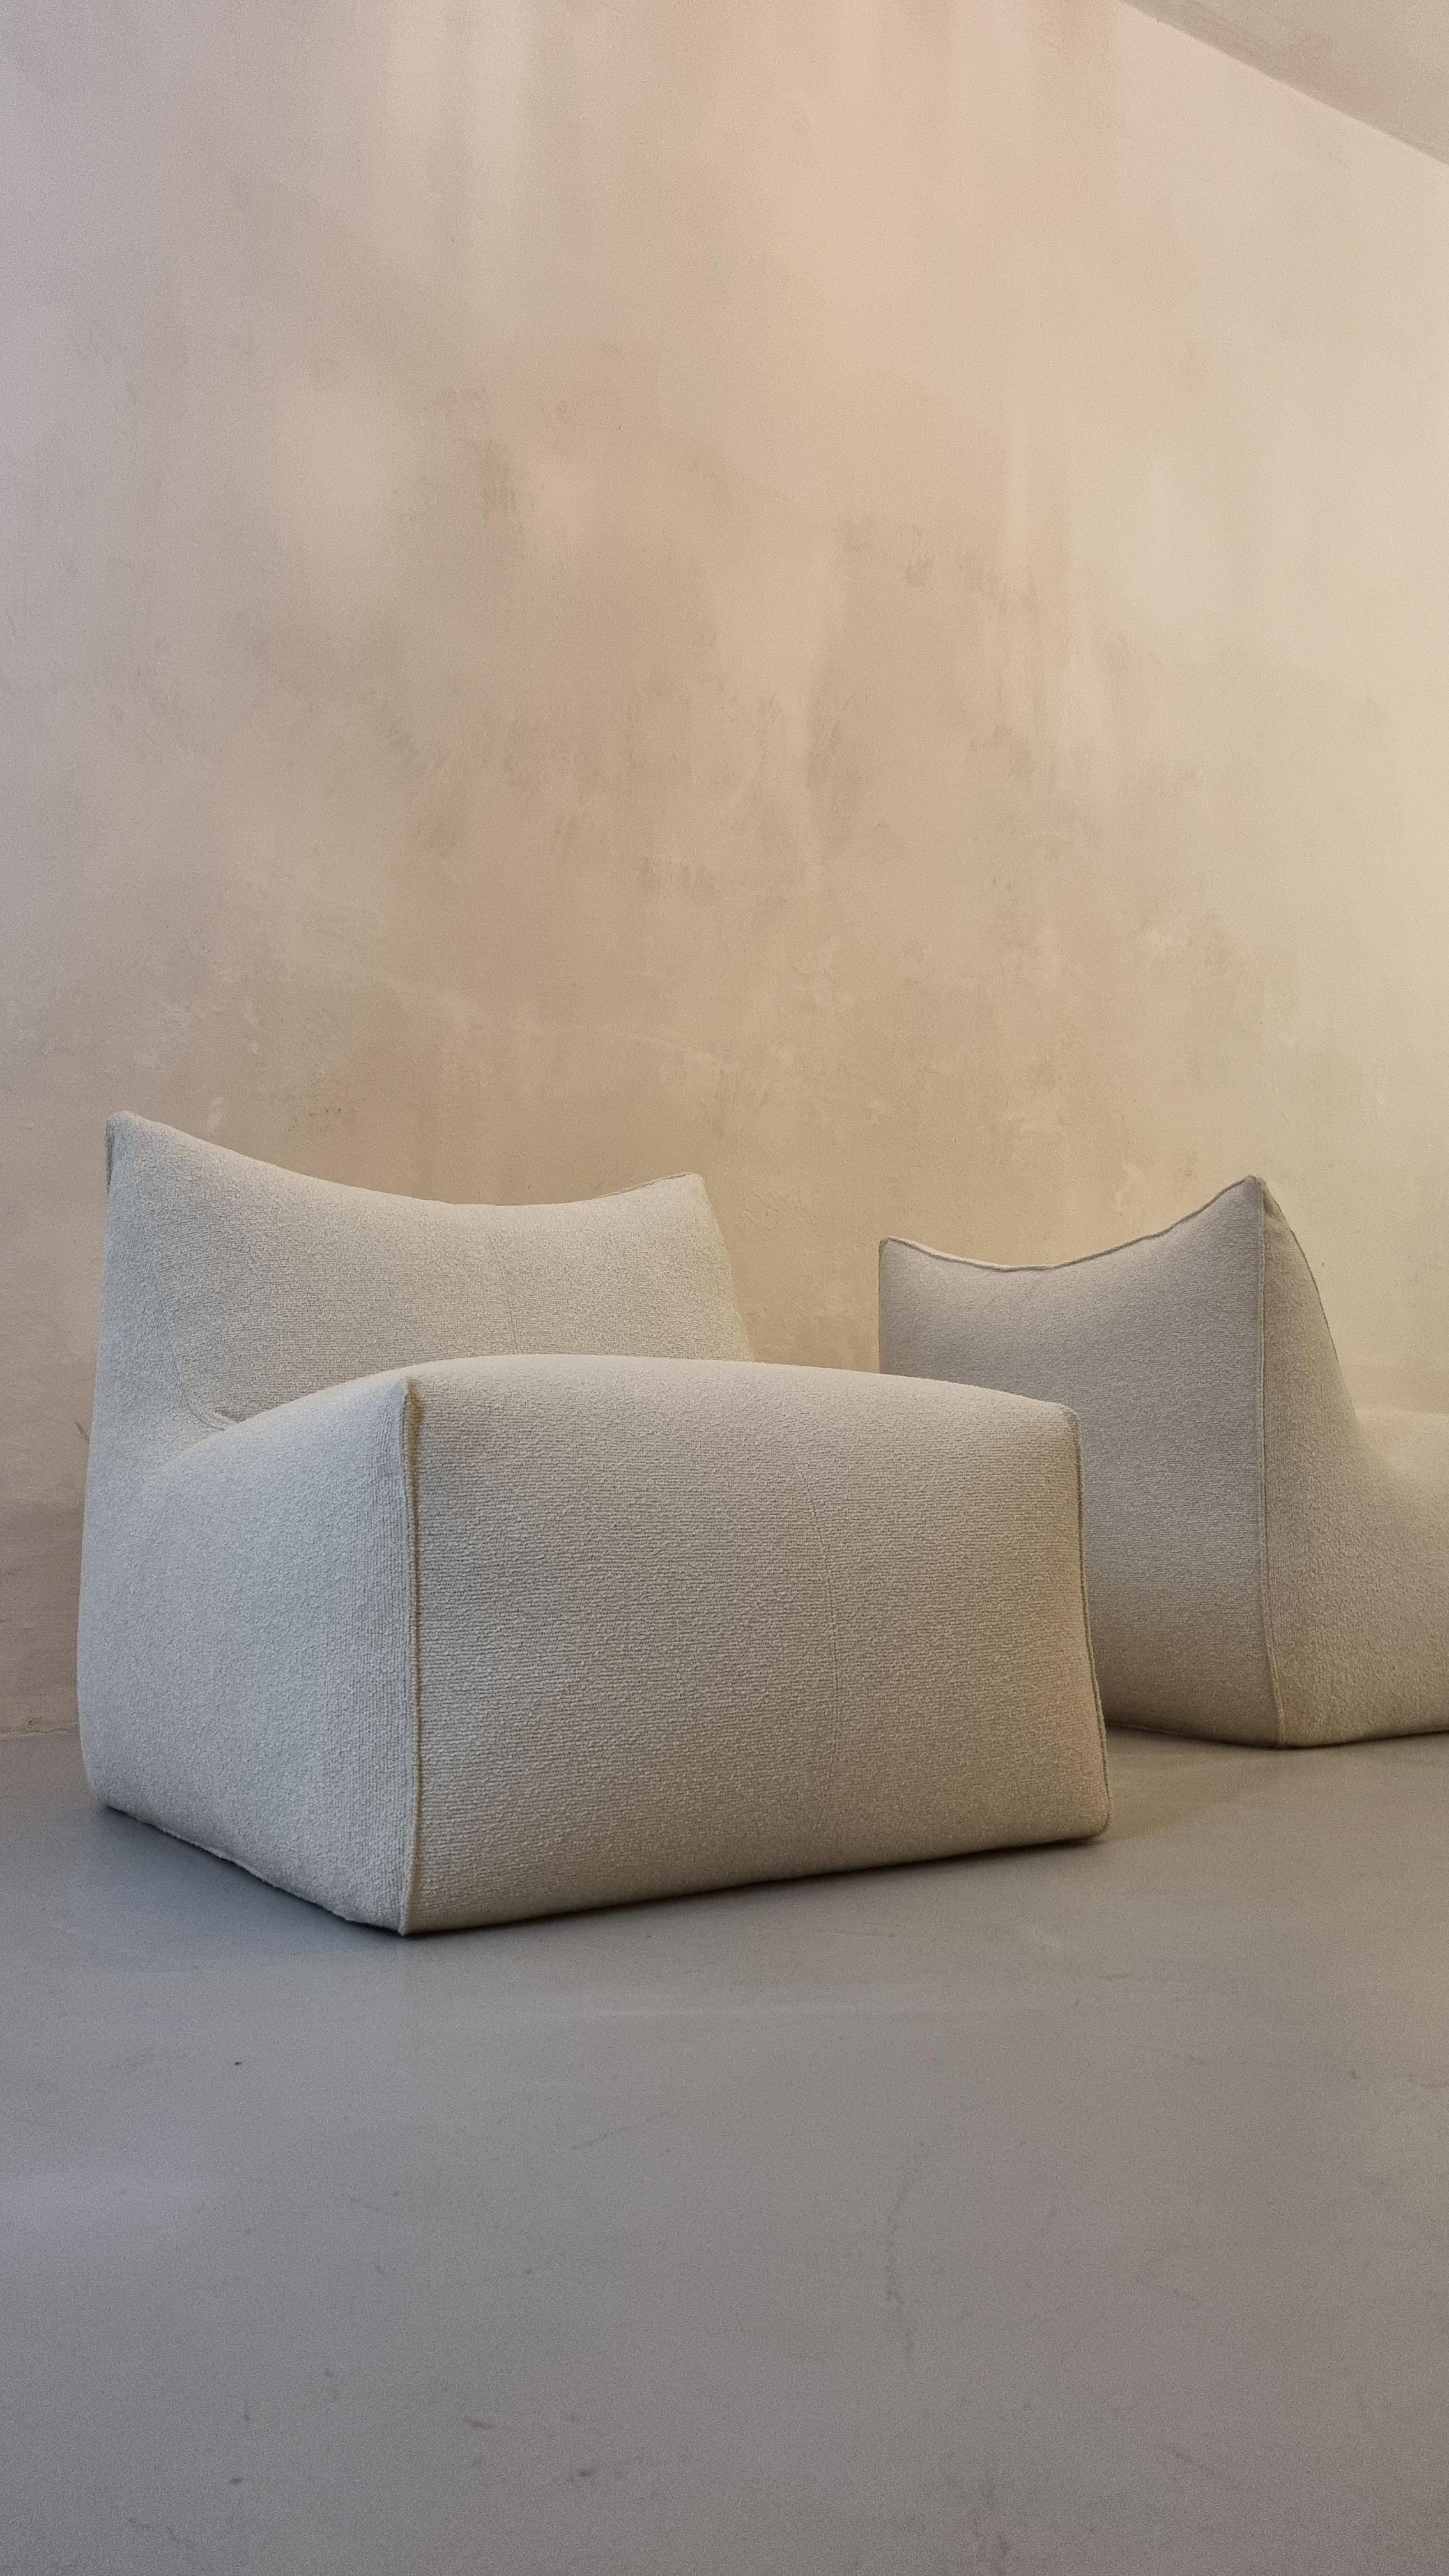 Le Bambole armchairs designed by Mario Bellini for B&B Italia, the Bambole series won the Compasso d'Oro award in 1979, reupholster in cotton fabric, Le Bambole is an iconic piece of Italian design.   included in the permanent collection of the MoMA